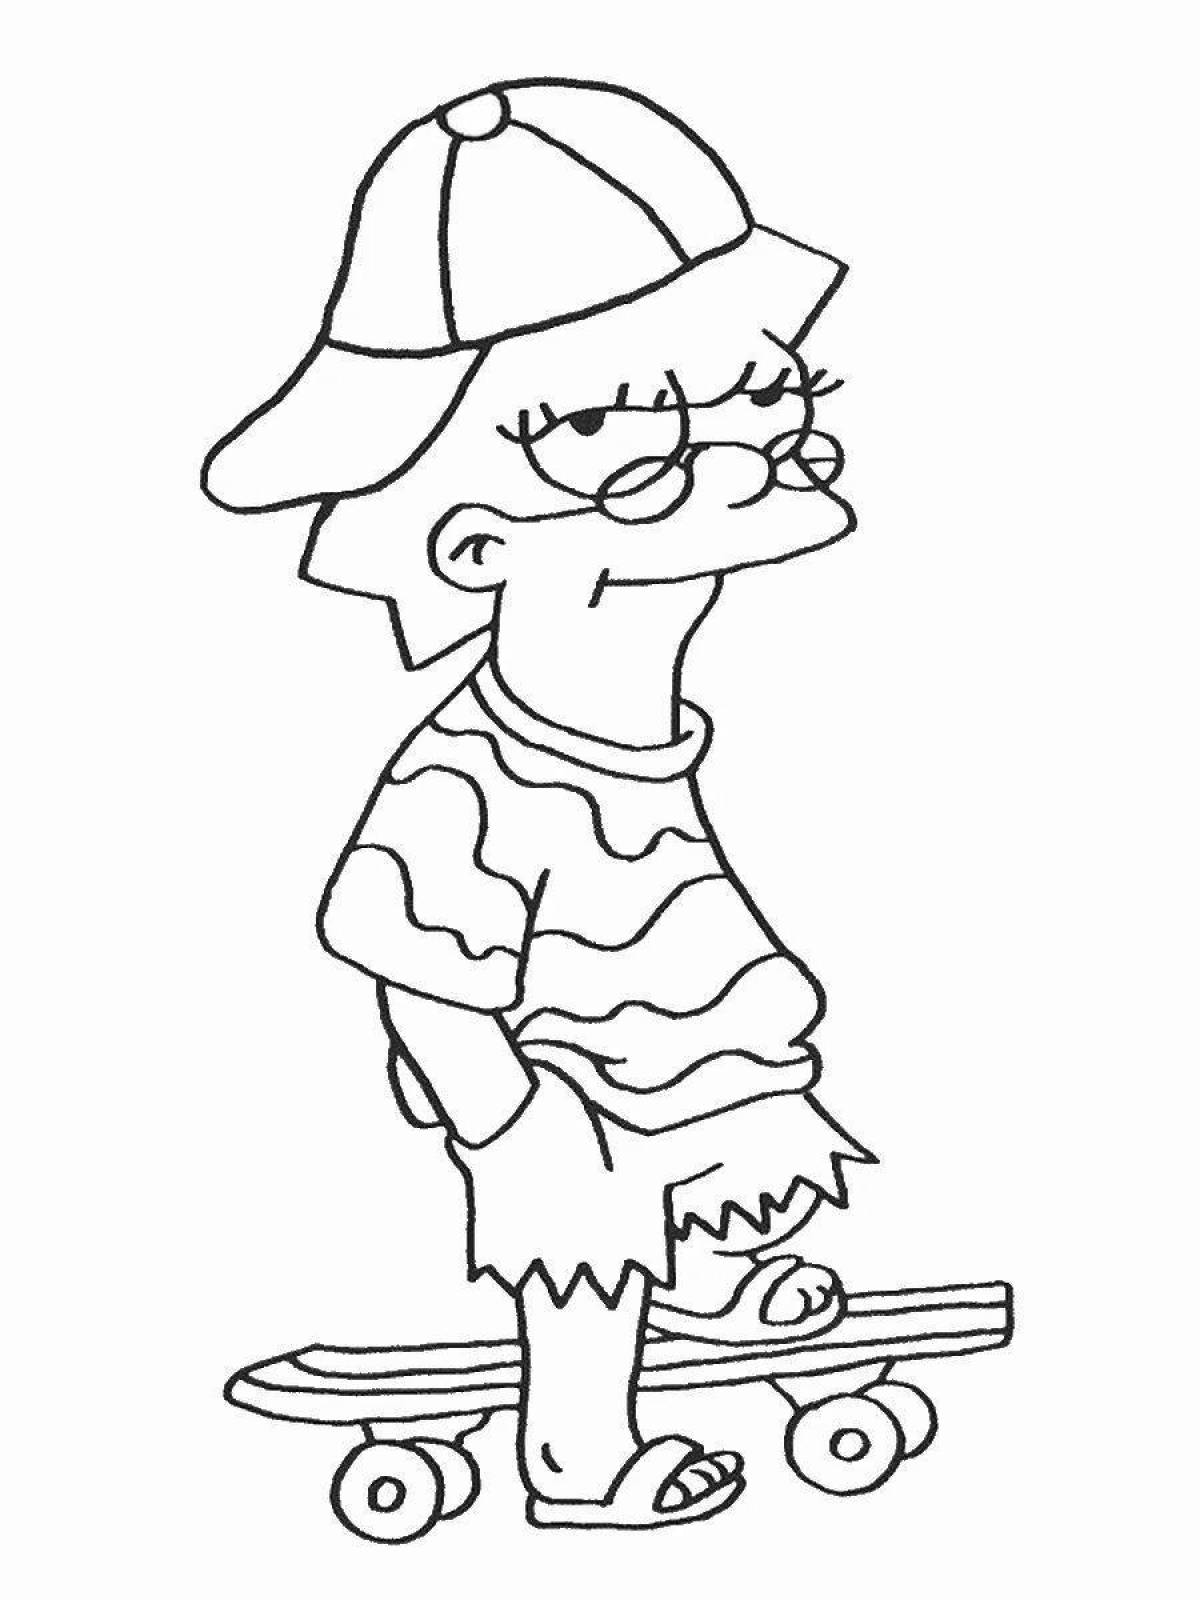 Color-explosion lisa simpson coloring page